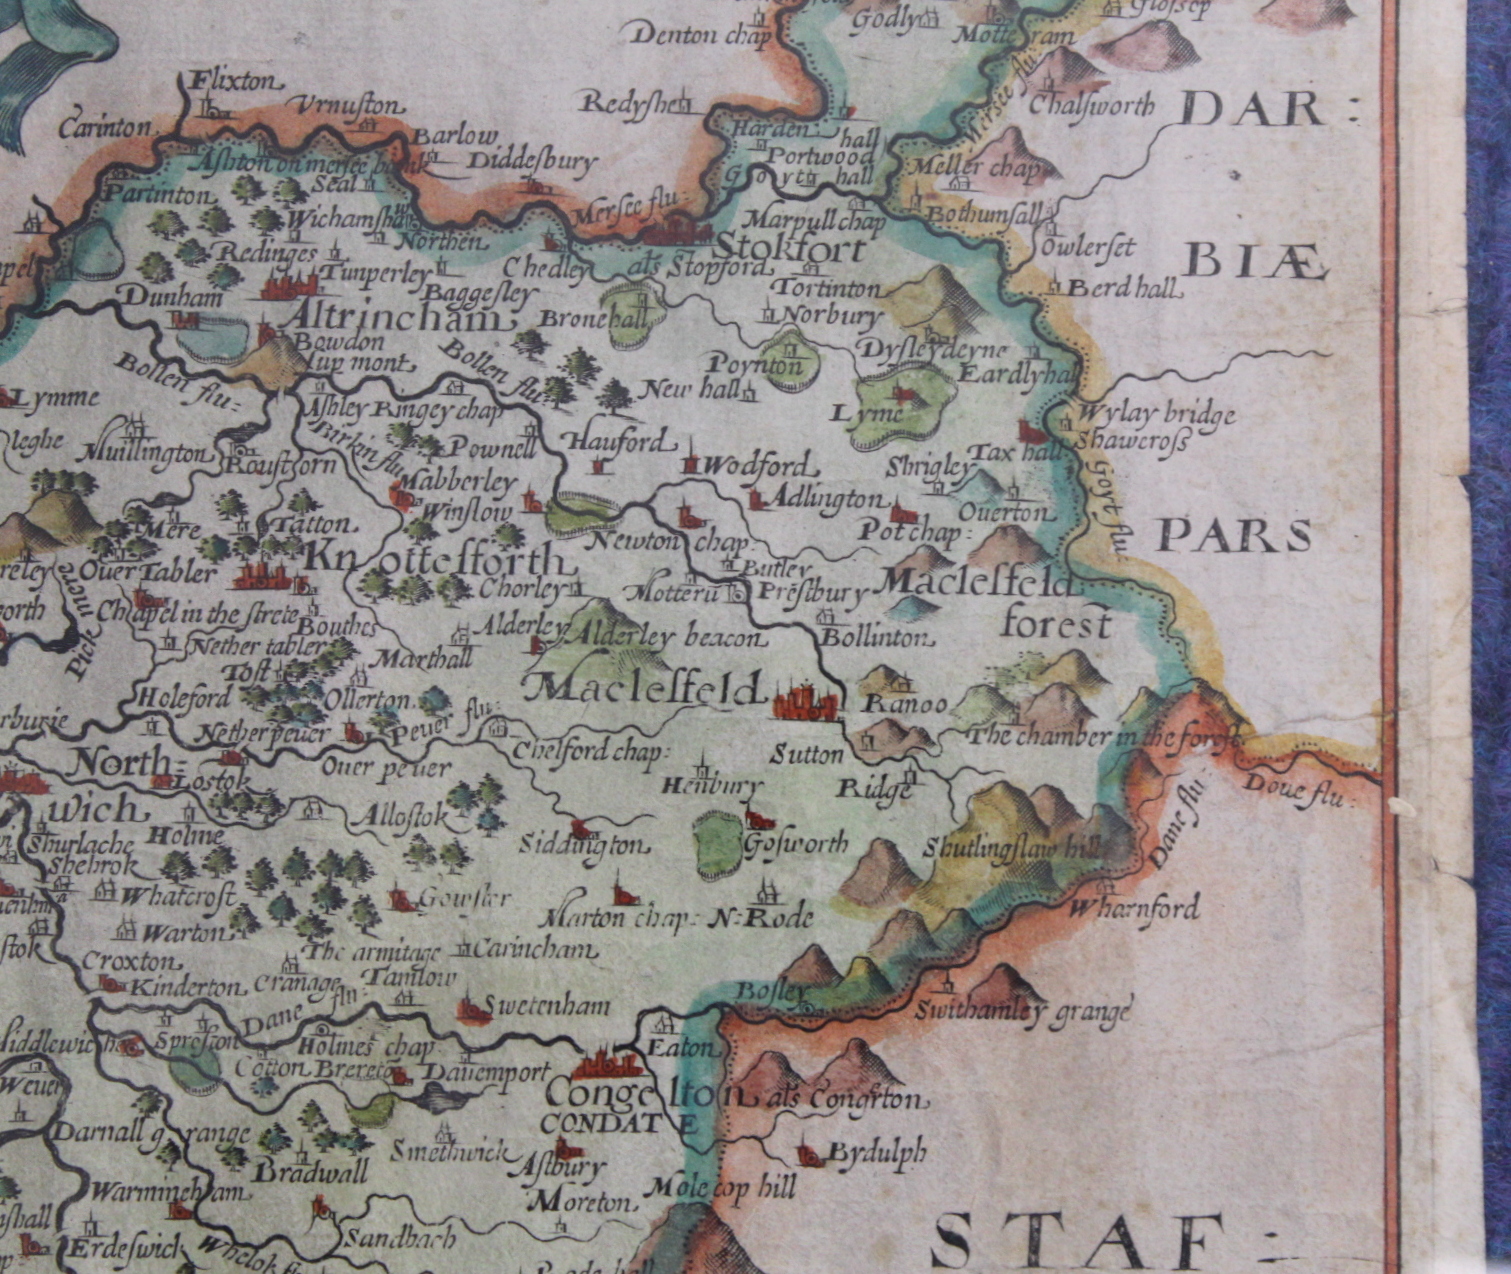 SAXTON CHRISTOPHER.  Cestriae (Cheshire). Antique hand coloured eng. map. 11" x 12", rolled, c.1610. - Image 7 of 27